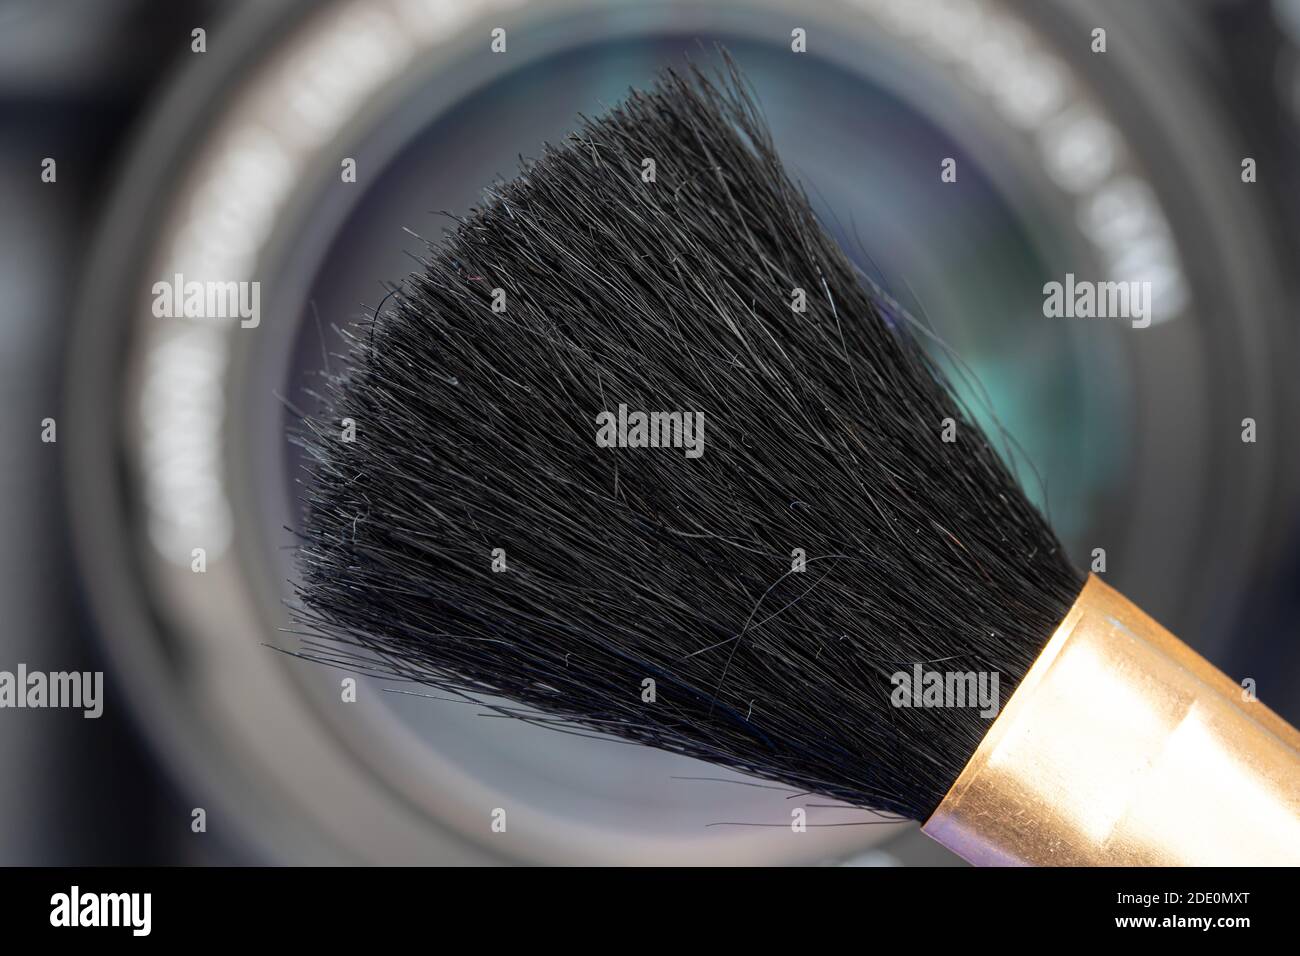 A brush for cleaning in front of the camera lens, close up. Stock Photo